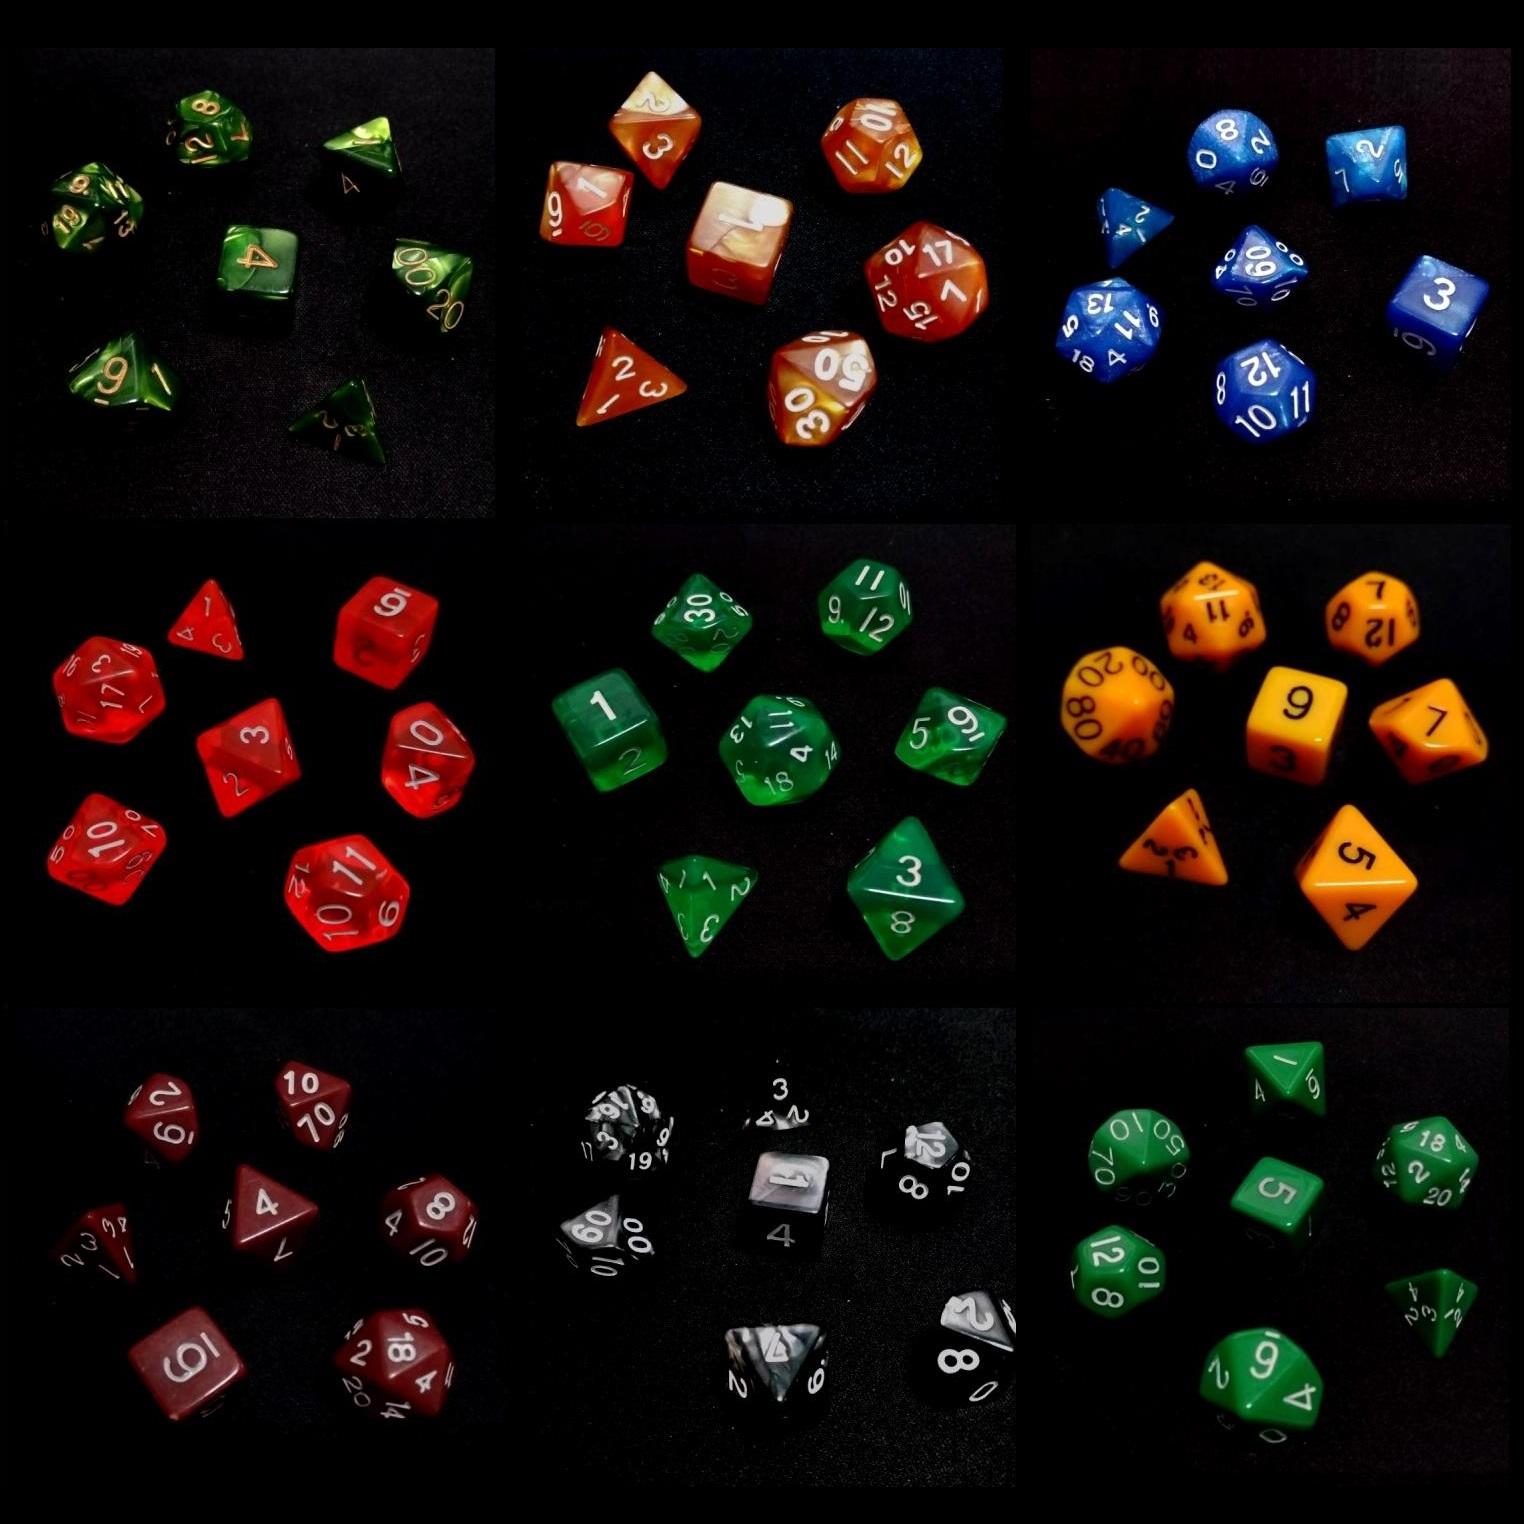 8Sets/56Pcs Polyhedral Dice For Dungeons & Dragons DND RPG MTG Board Games W/Bag